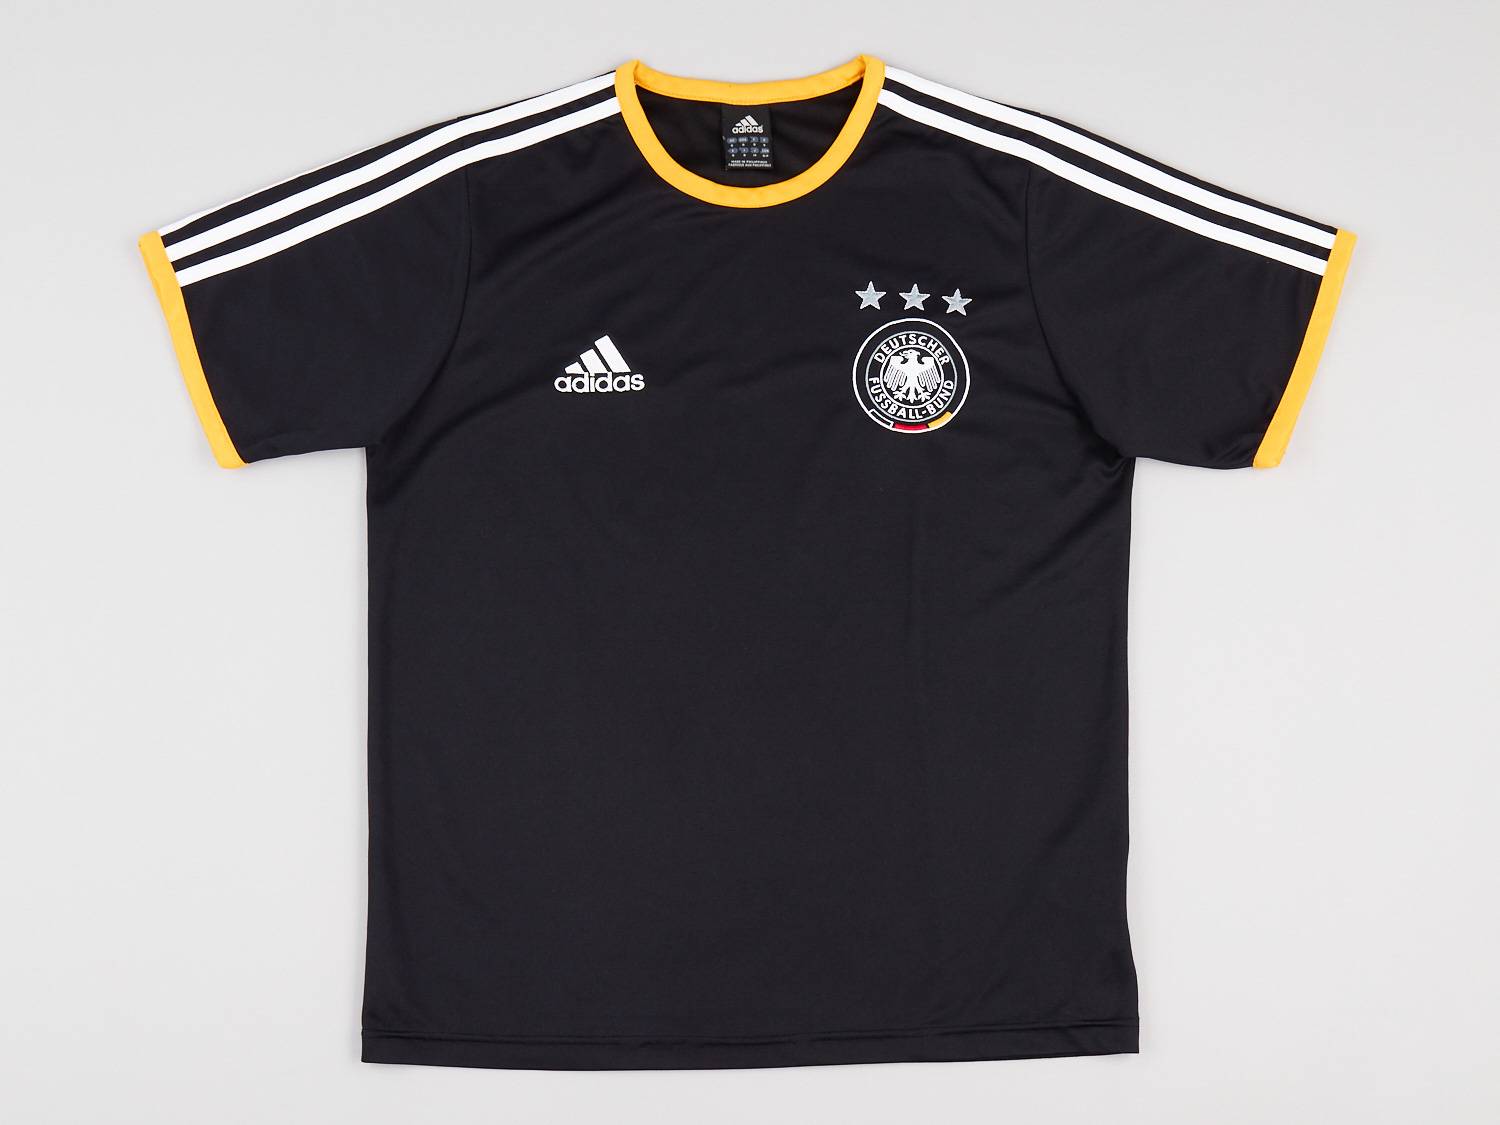 2000s Germany adidas Training Shirt (Excellent) S